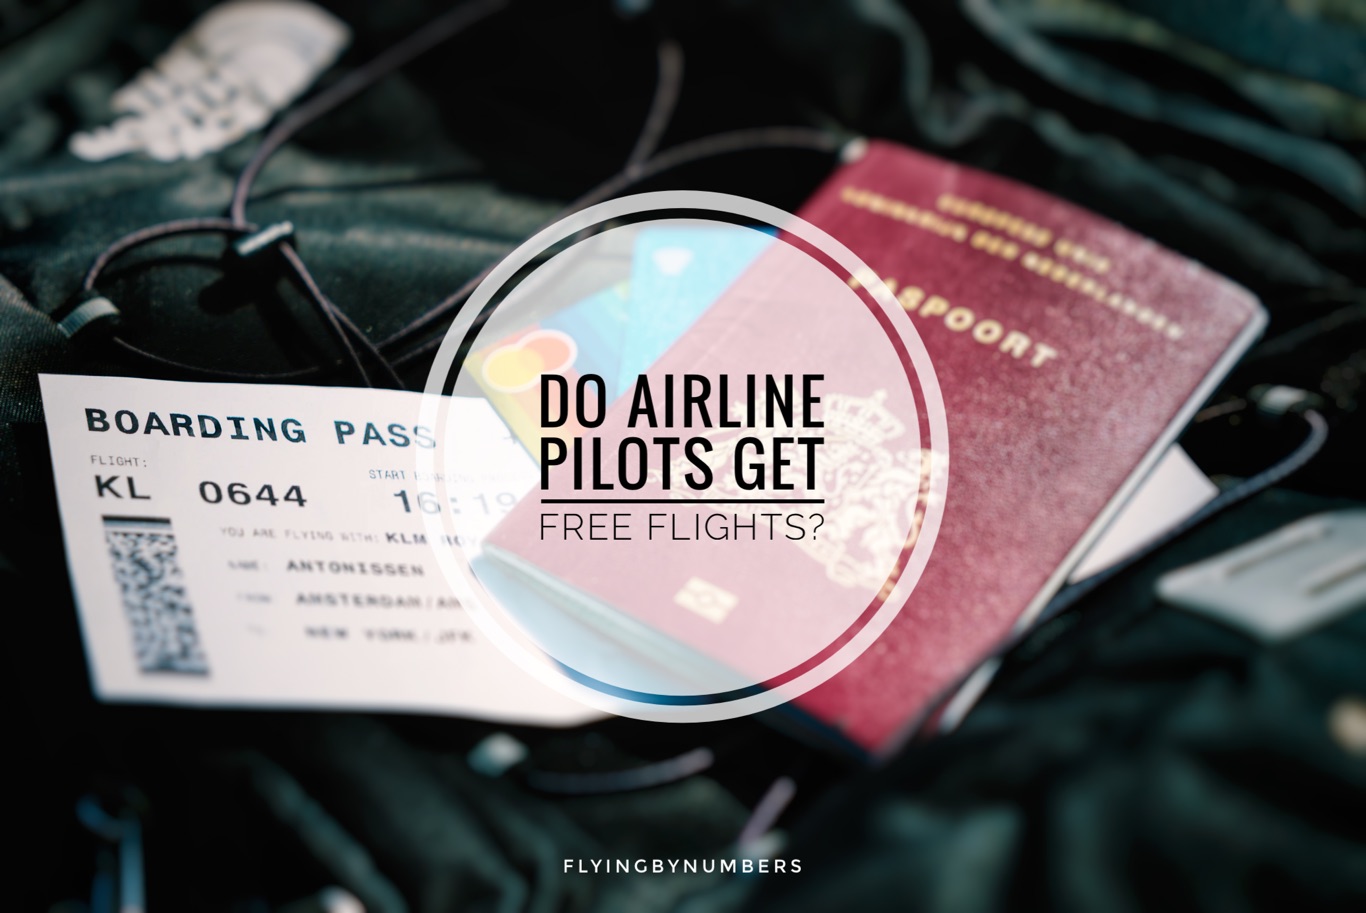 A look at the discounted flight benefits for airline pilots